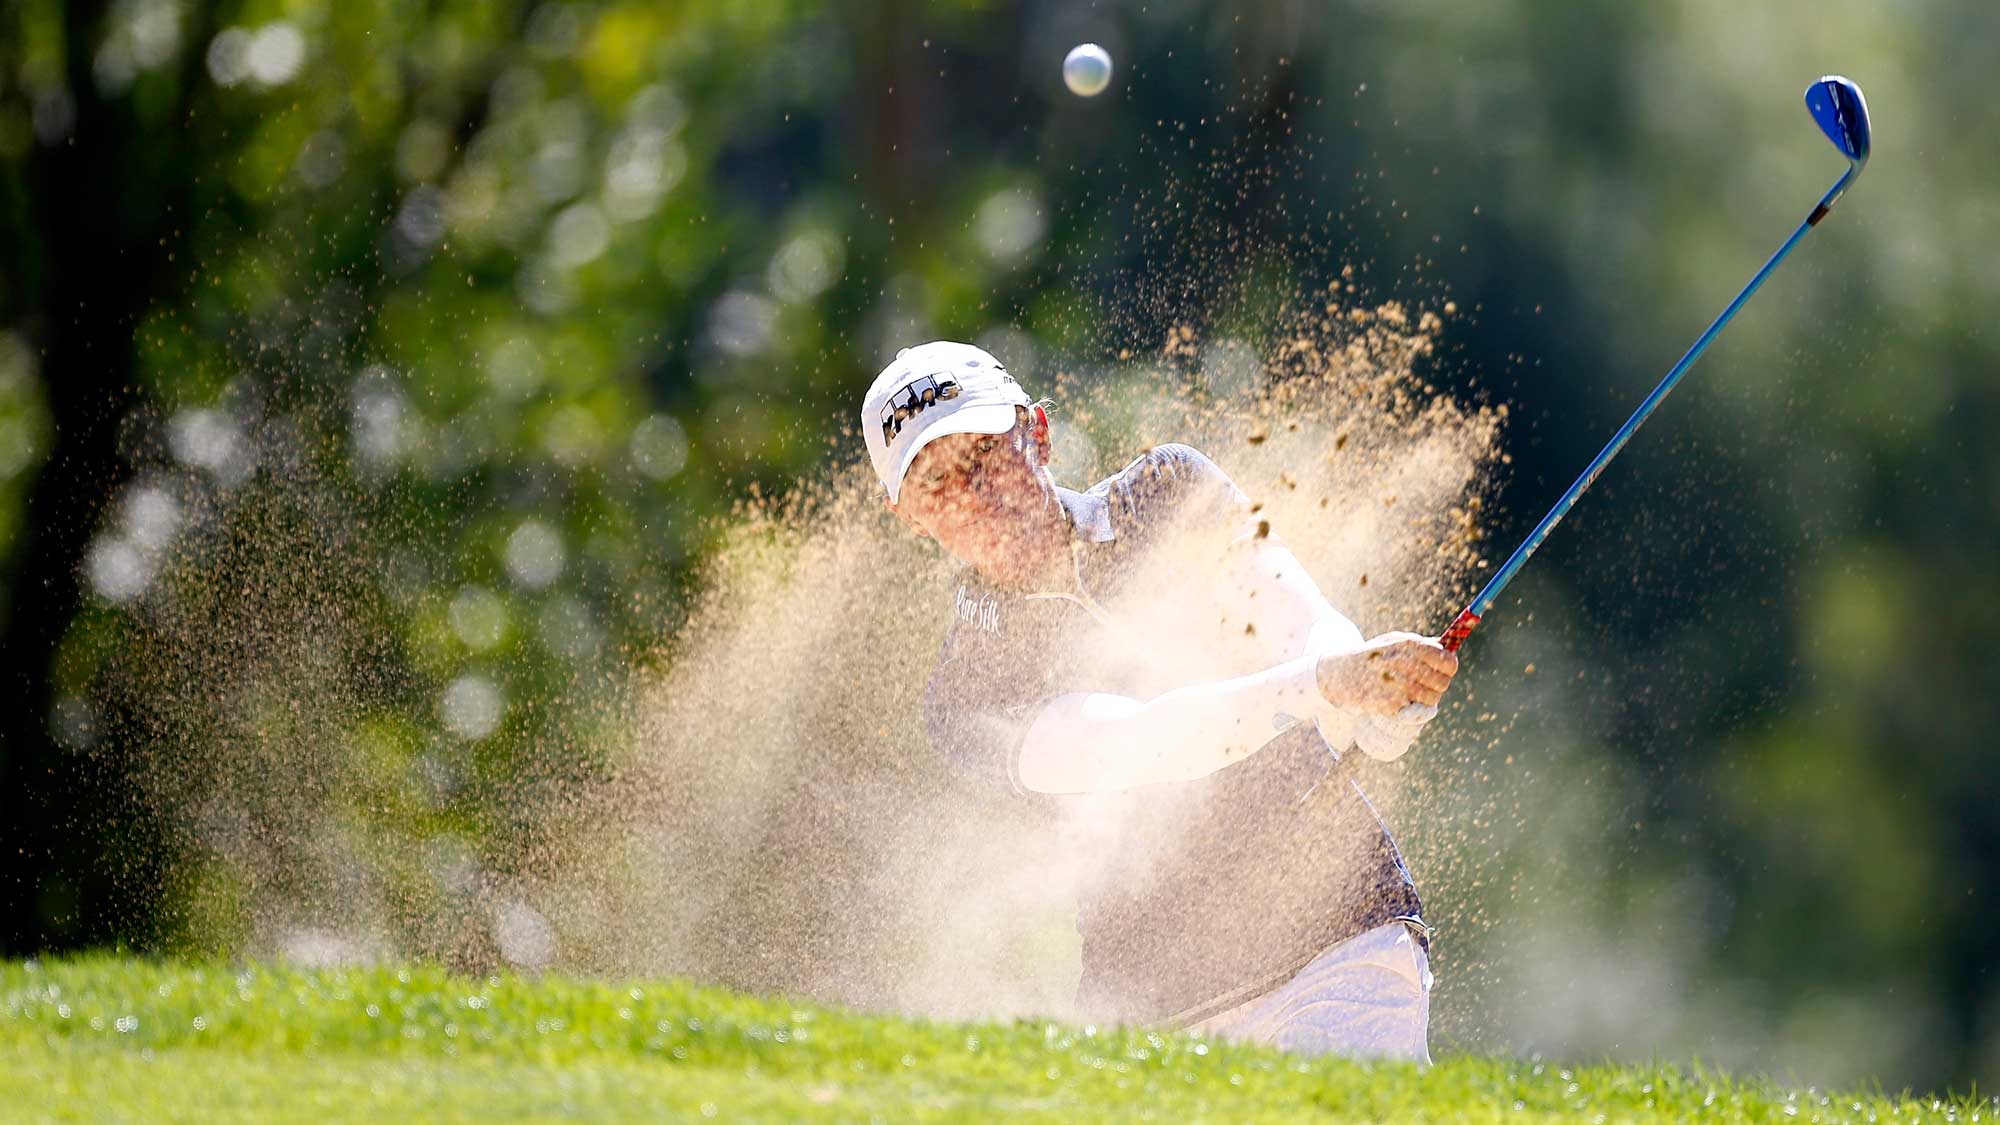 Stacy Lewis hits out of the bunker on the 5th hole during the third round of the LPGA Cambia Portland Classic